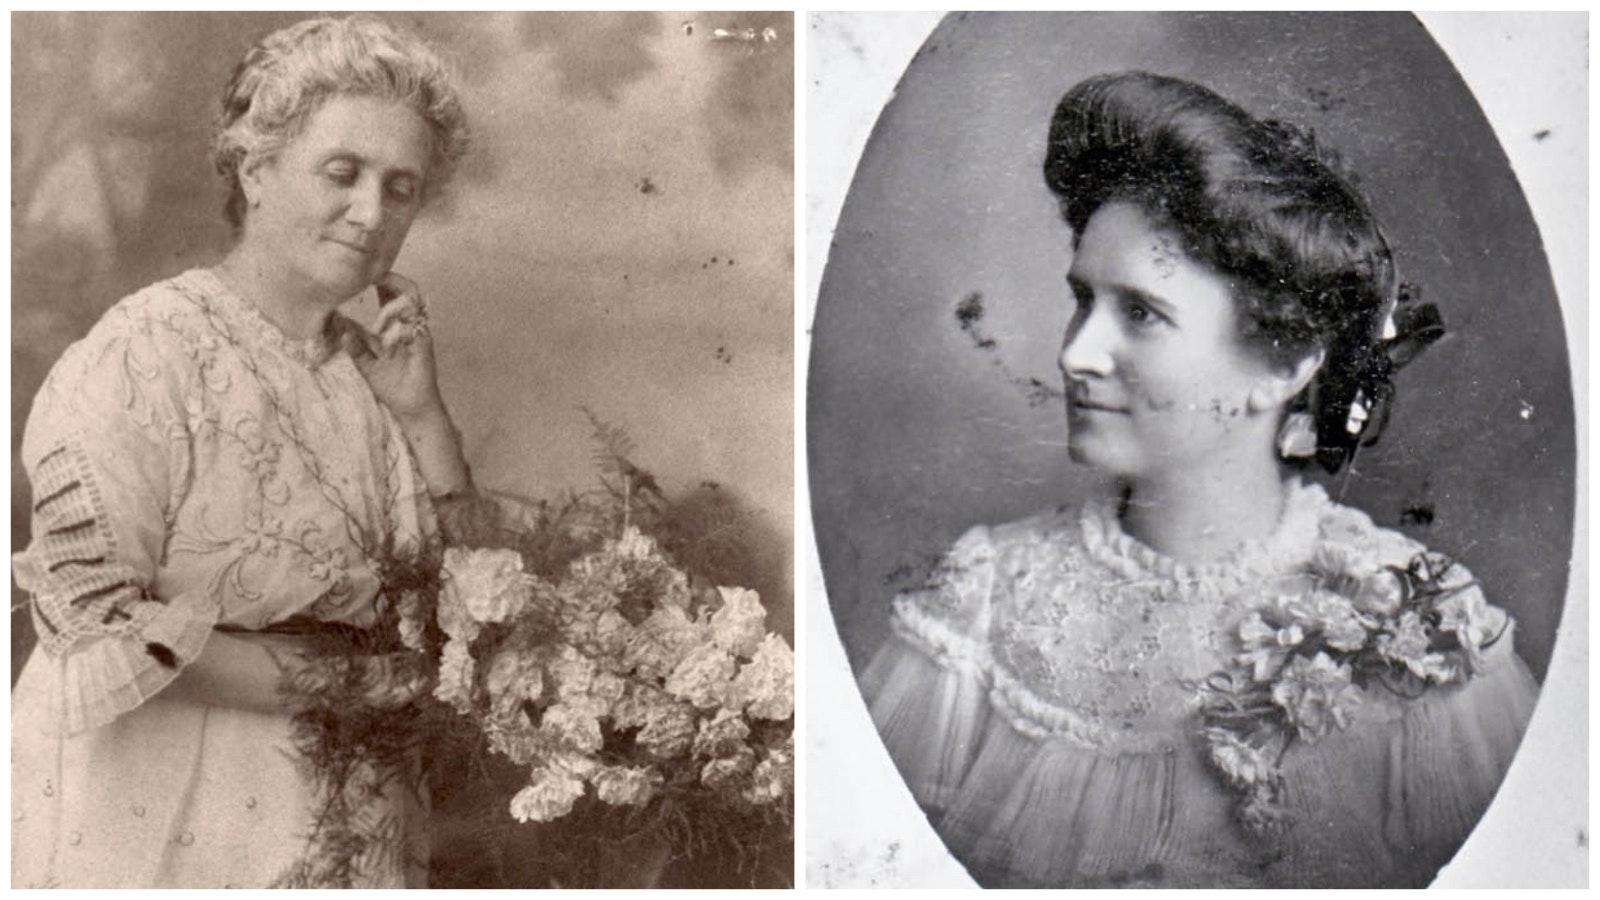 Dora McGrath later in life, left, and as a young woman, right.